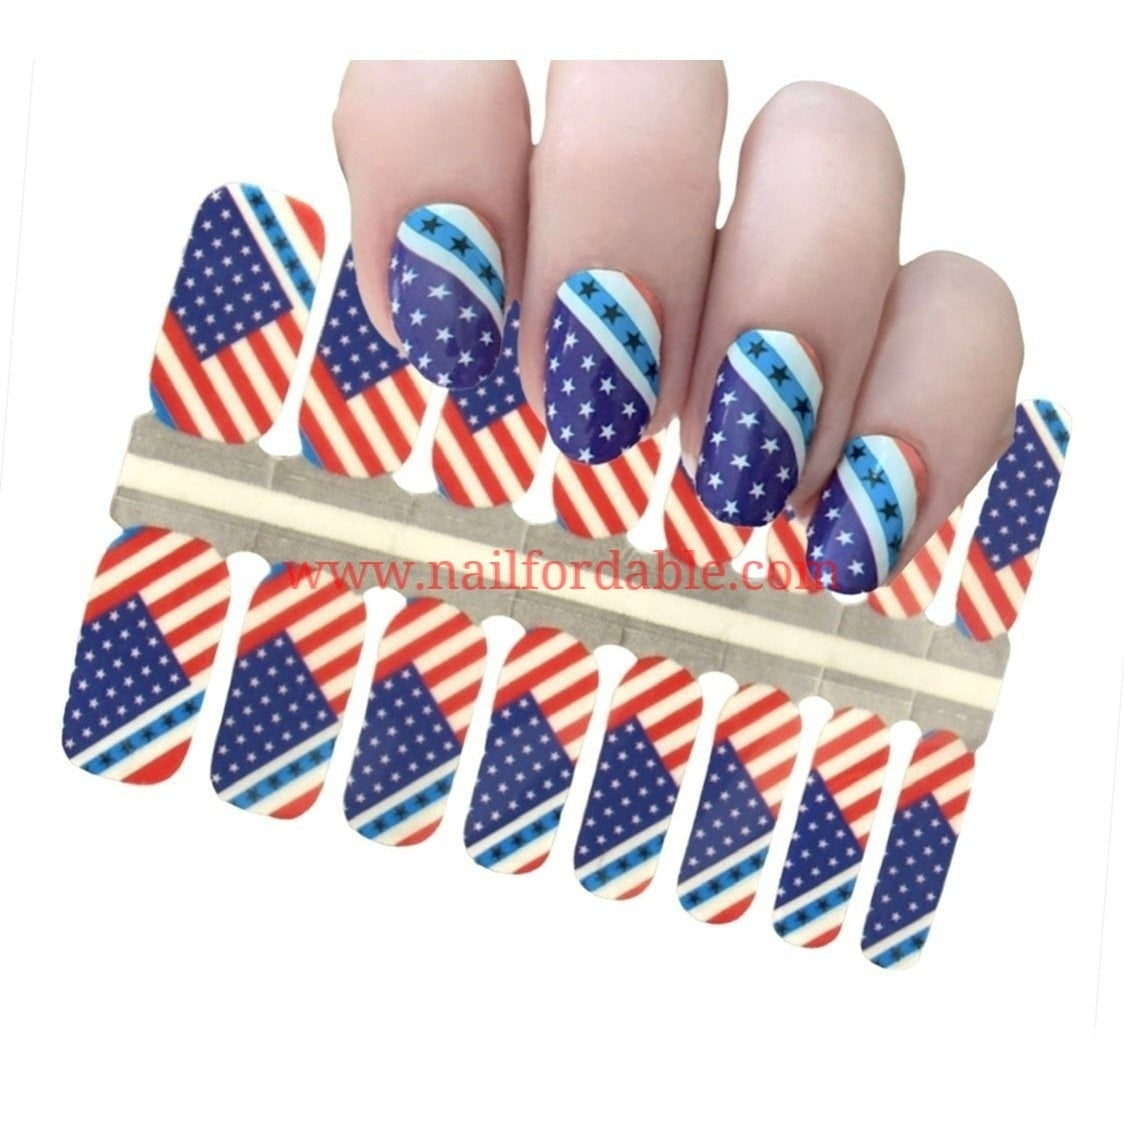 American Nails Styles: Read Reviews and Book Classes on ClassPass